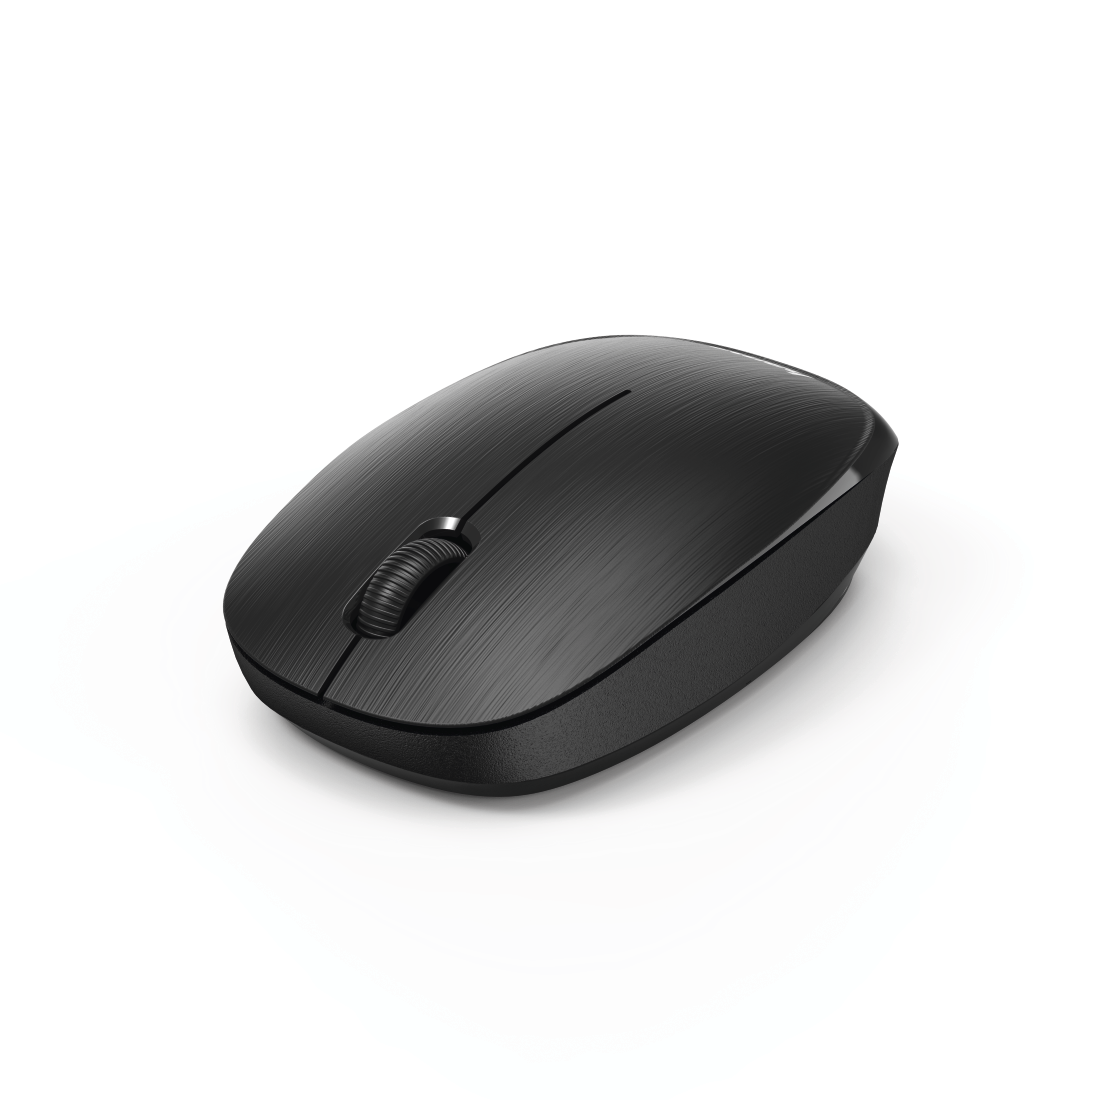 You Recently Viewed Hama 00182618 MW-110 Optical Wireless Mouse, 3 Buttons, black Image